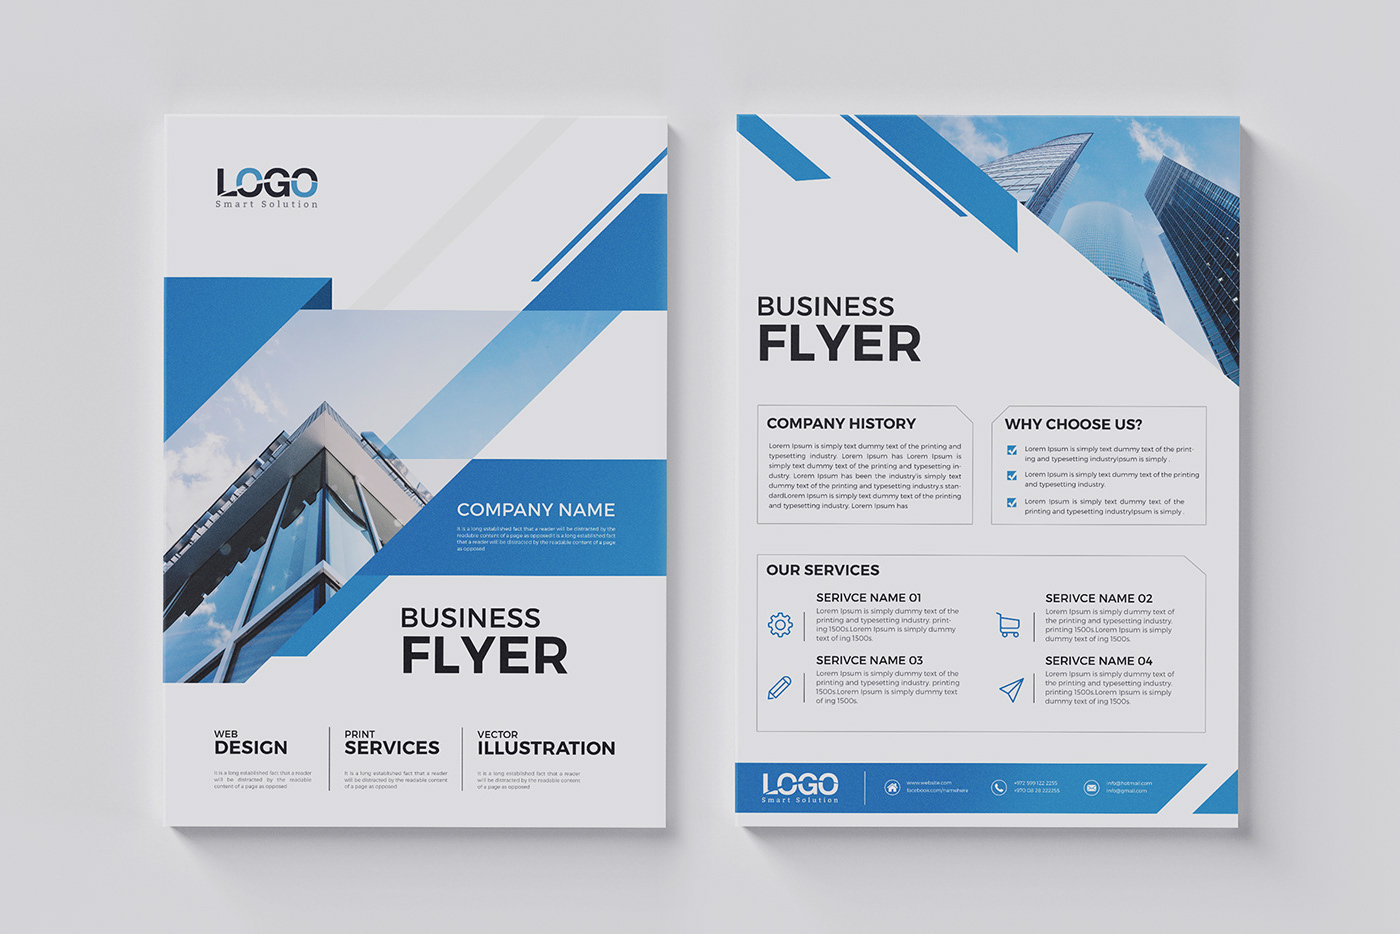 6 Sided Brochure Template